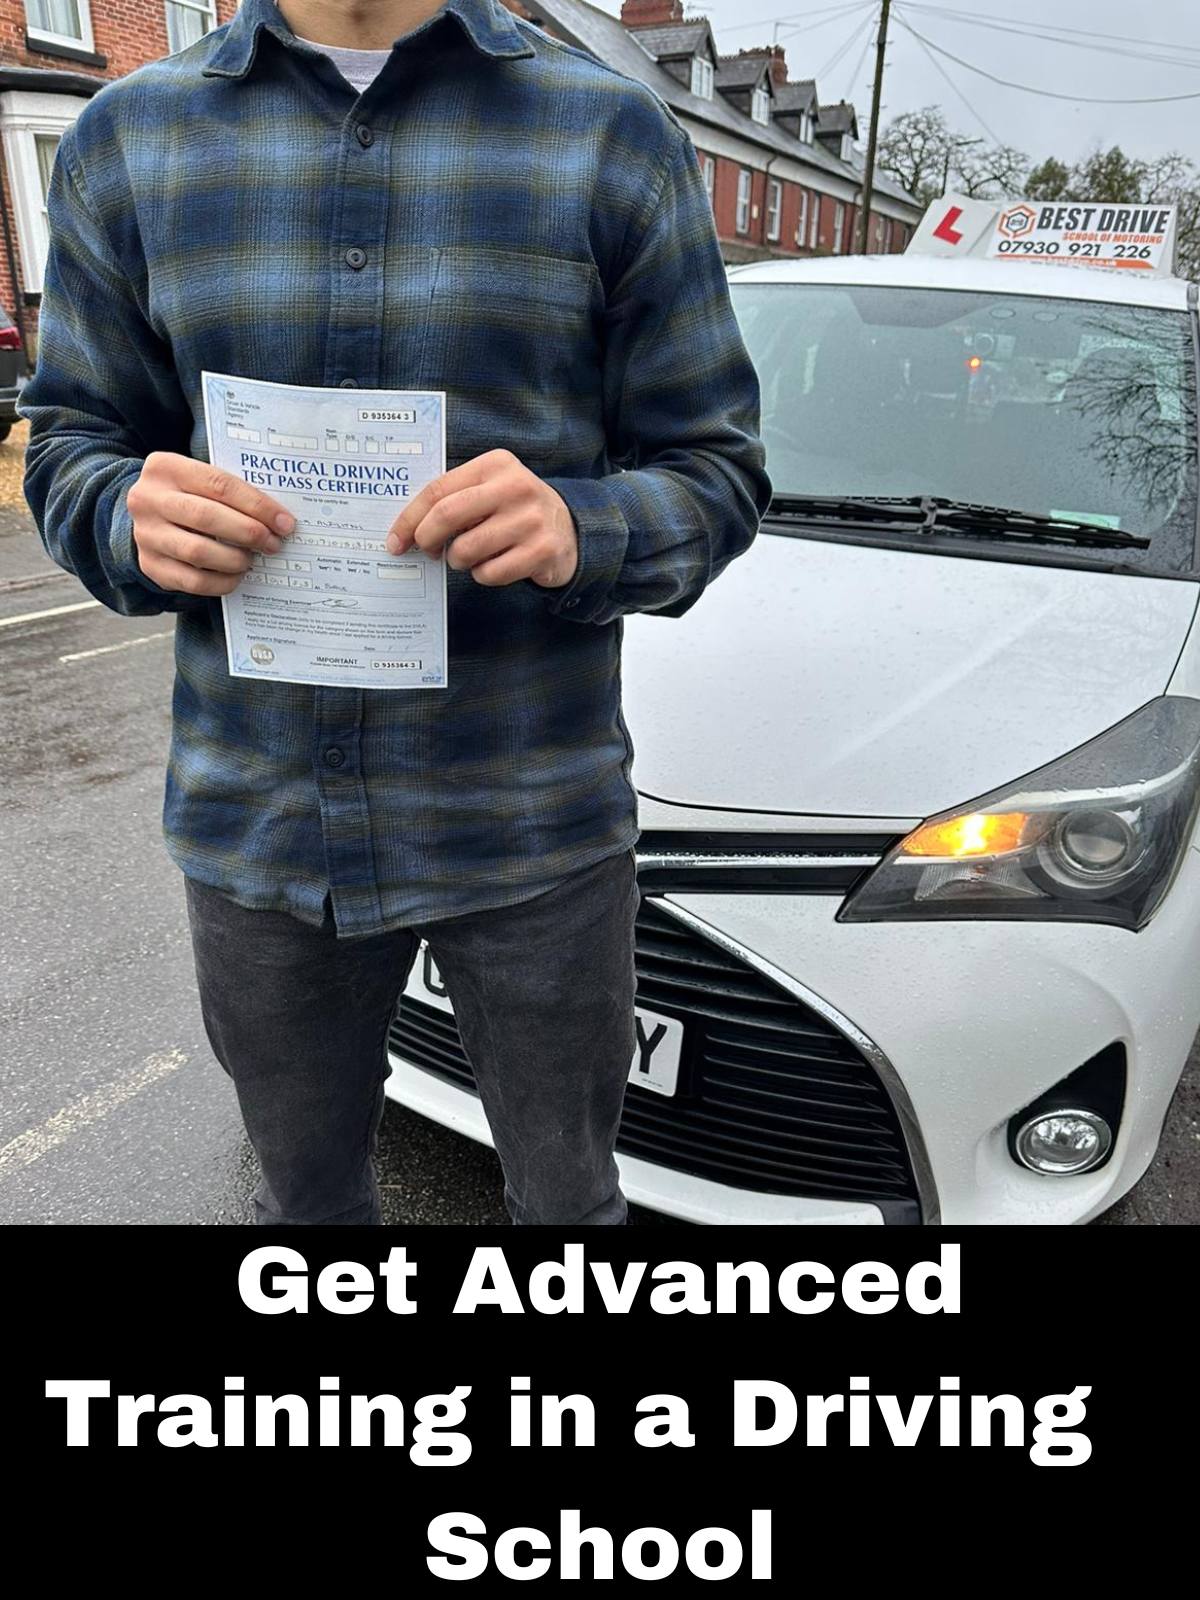 Get Advanced Training in a Driving School